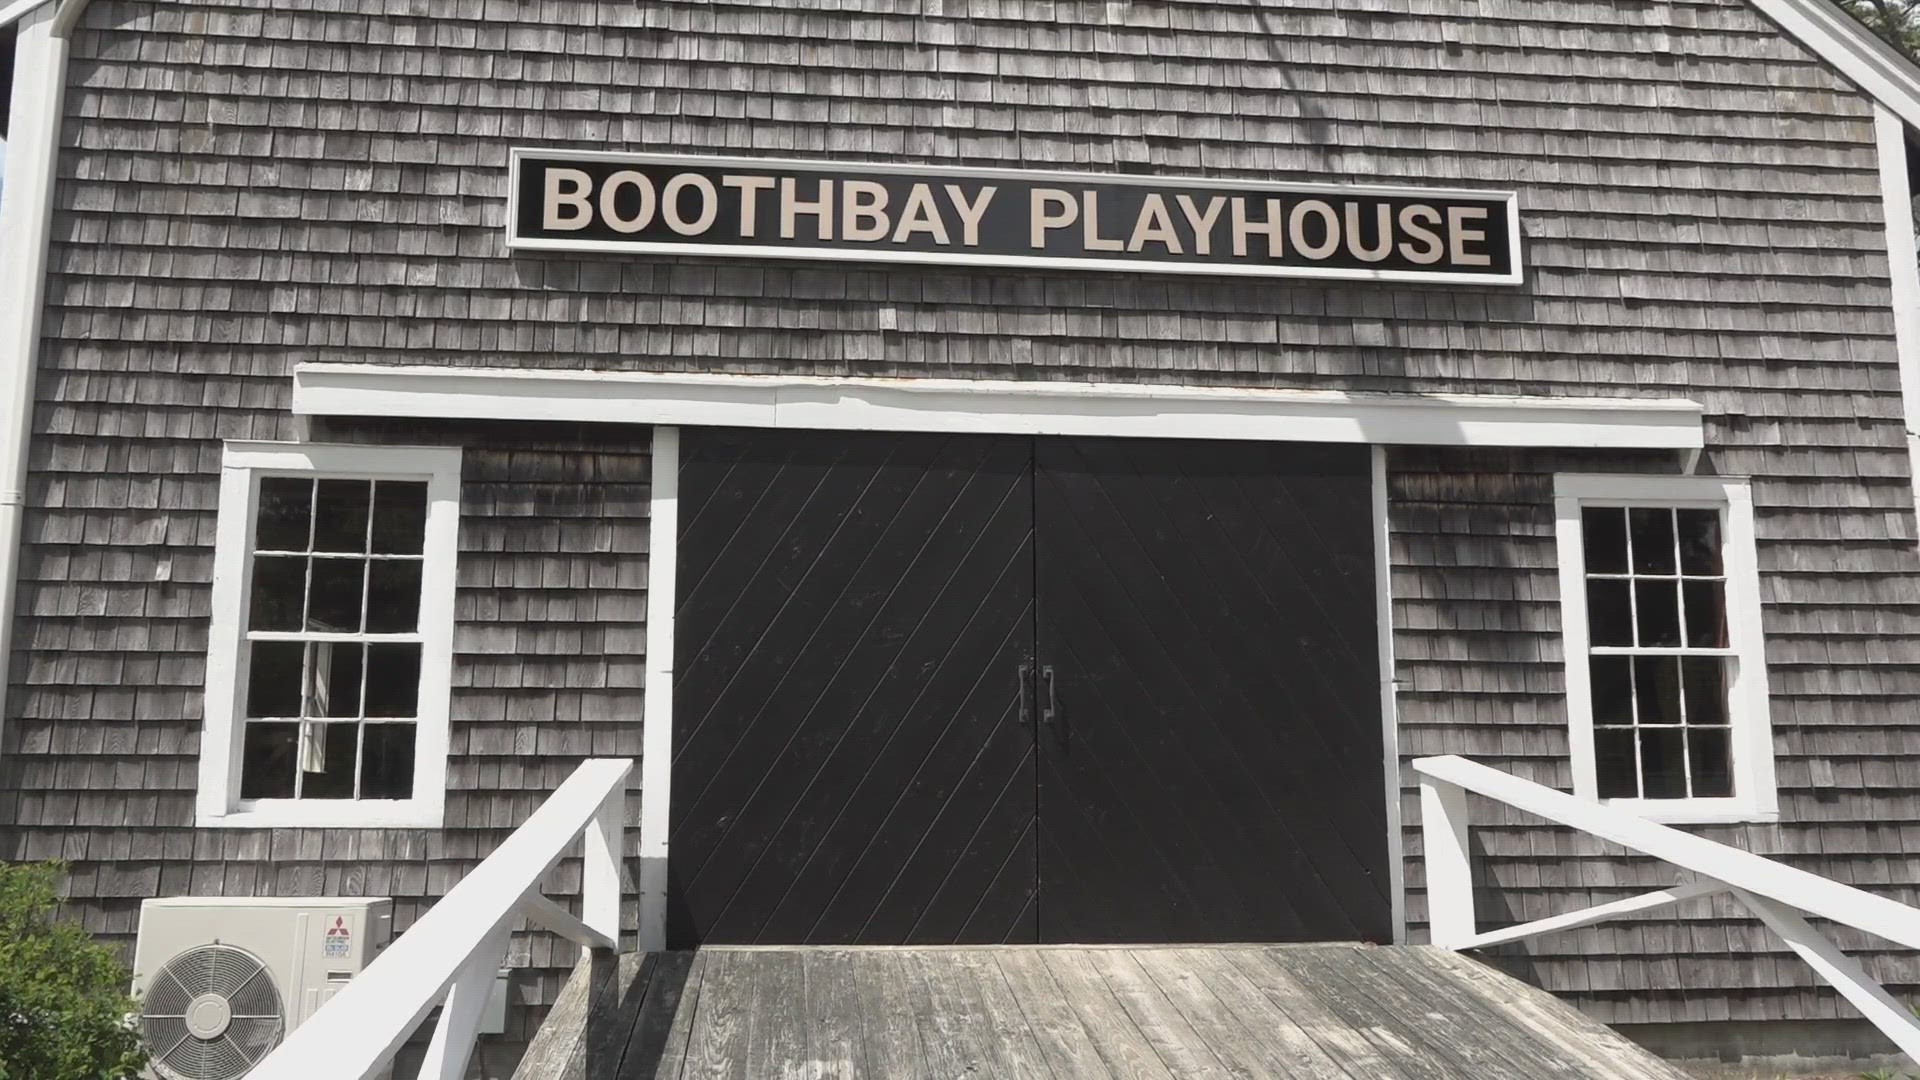 Thanks to the vision of its new owners, the Boothbay Playhouse has been lovingly repurposed into an enchanting wedding venue.